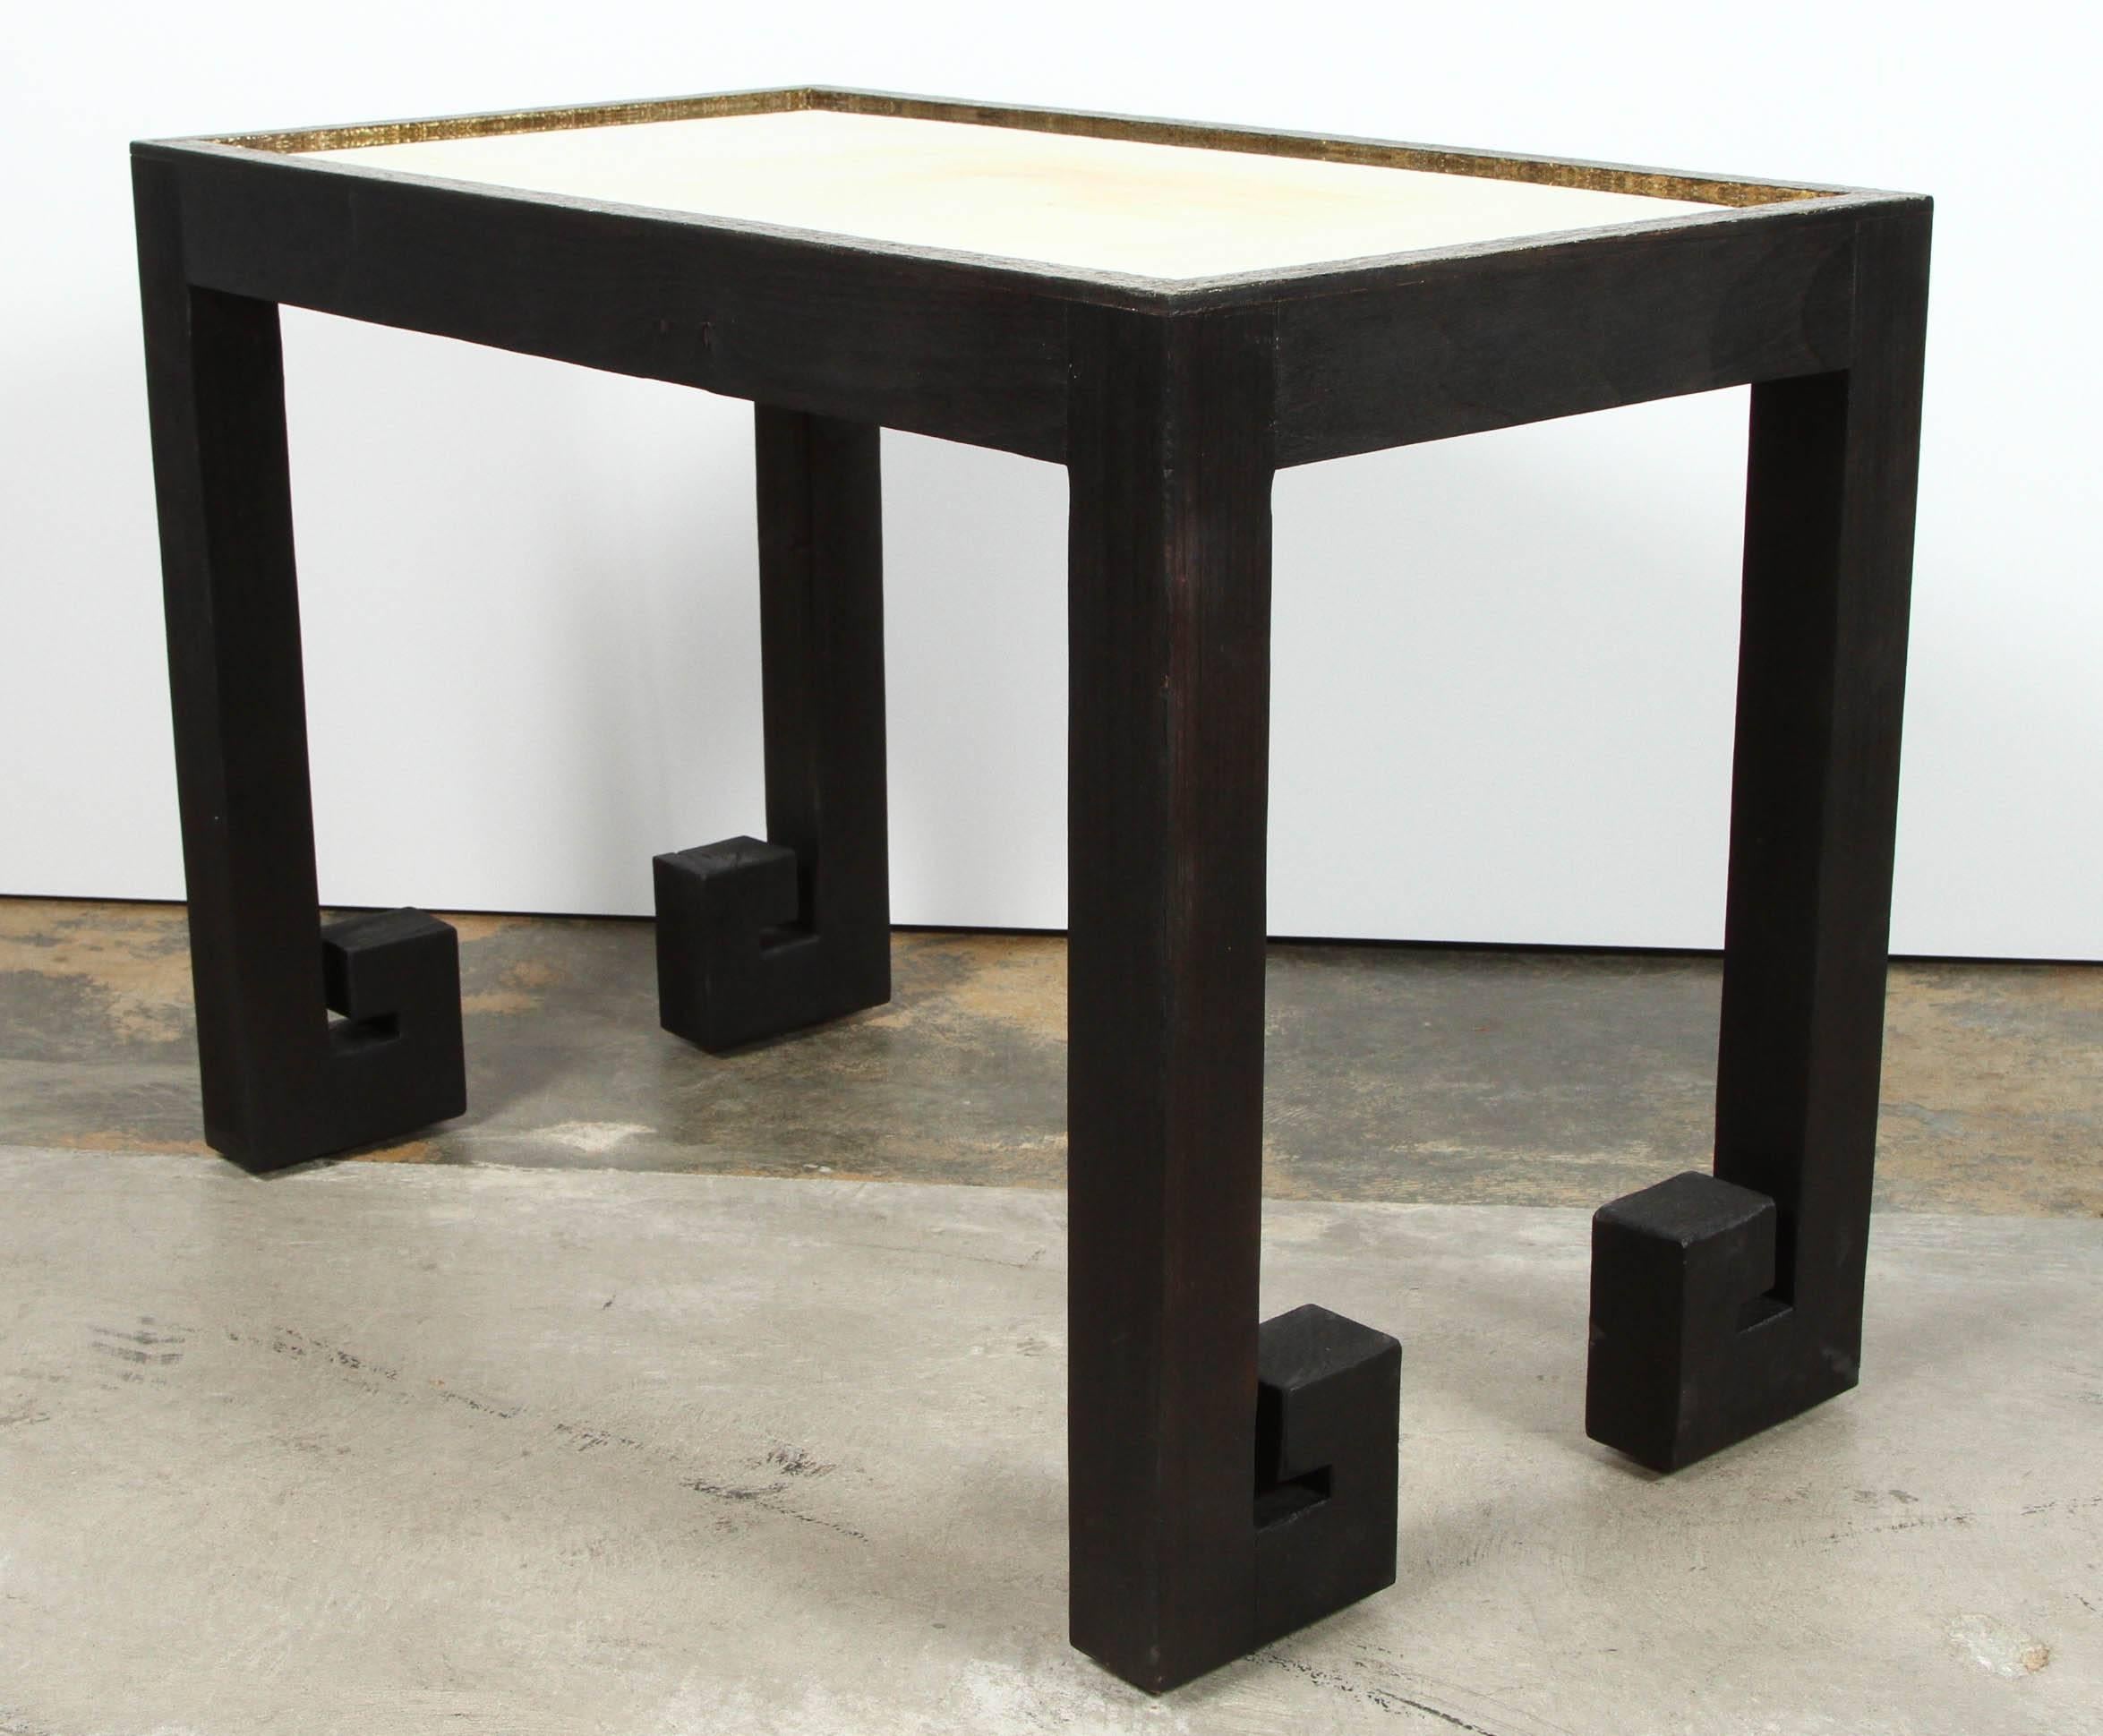 Modern pair of  Greek Key tables in distressed wood with black finish and top edges in mottled gold. Unlacquered brass inset.  Organic modern. Price is for in-stock pair. 

See last two photos as example for brass sheen - reflective quality. As